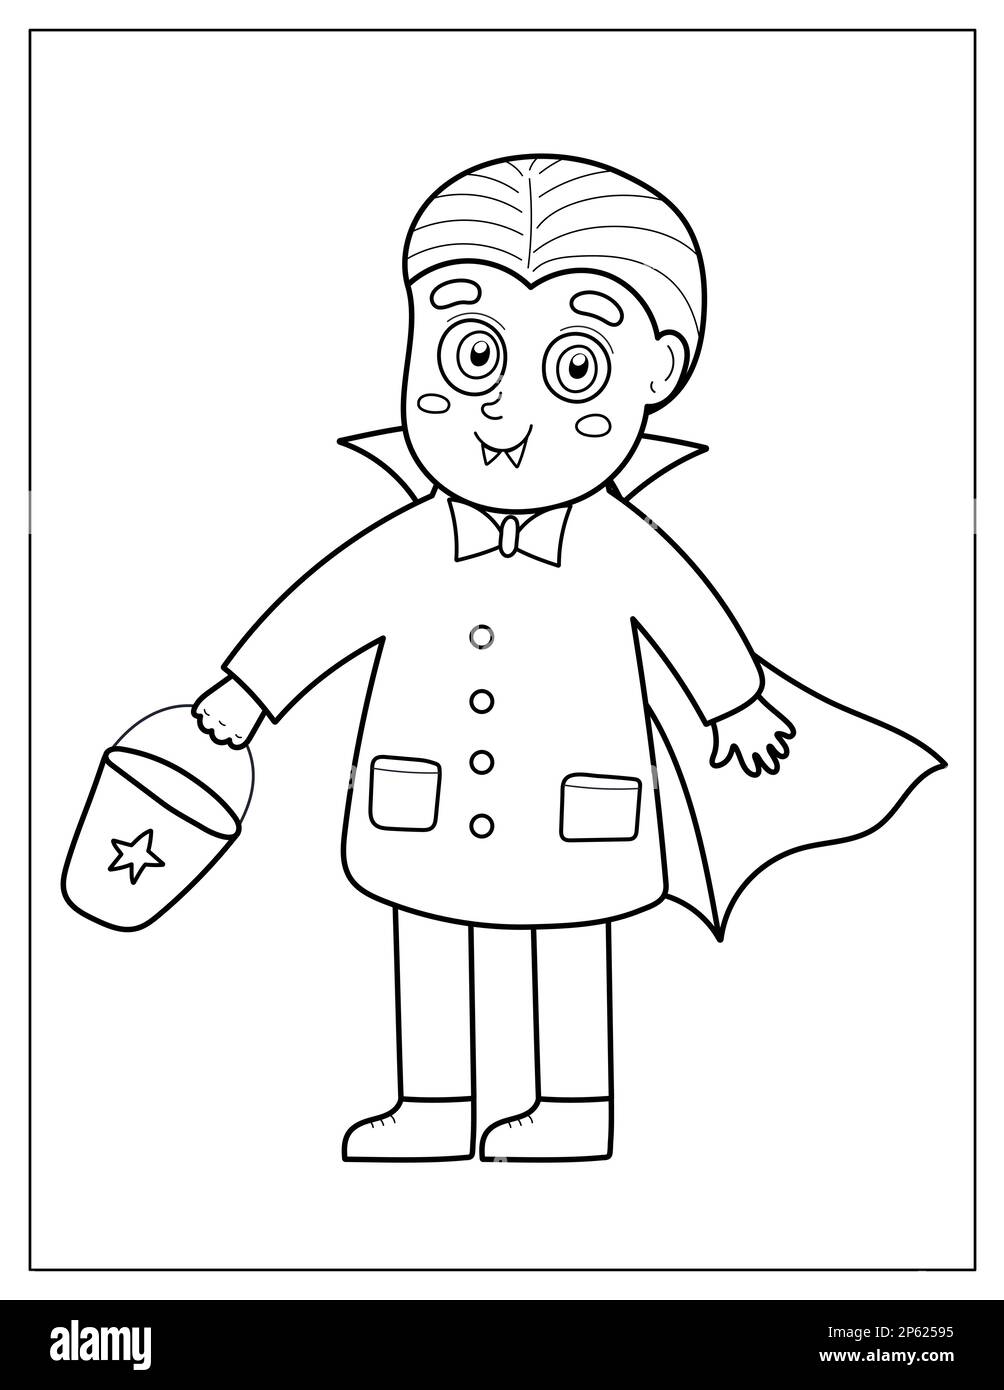 Halloween coloring page with a cute vampire boy trick or treat kid in dracula costume stock vector image art